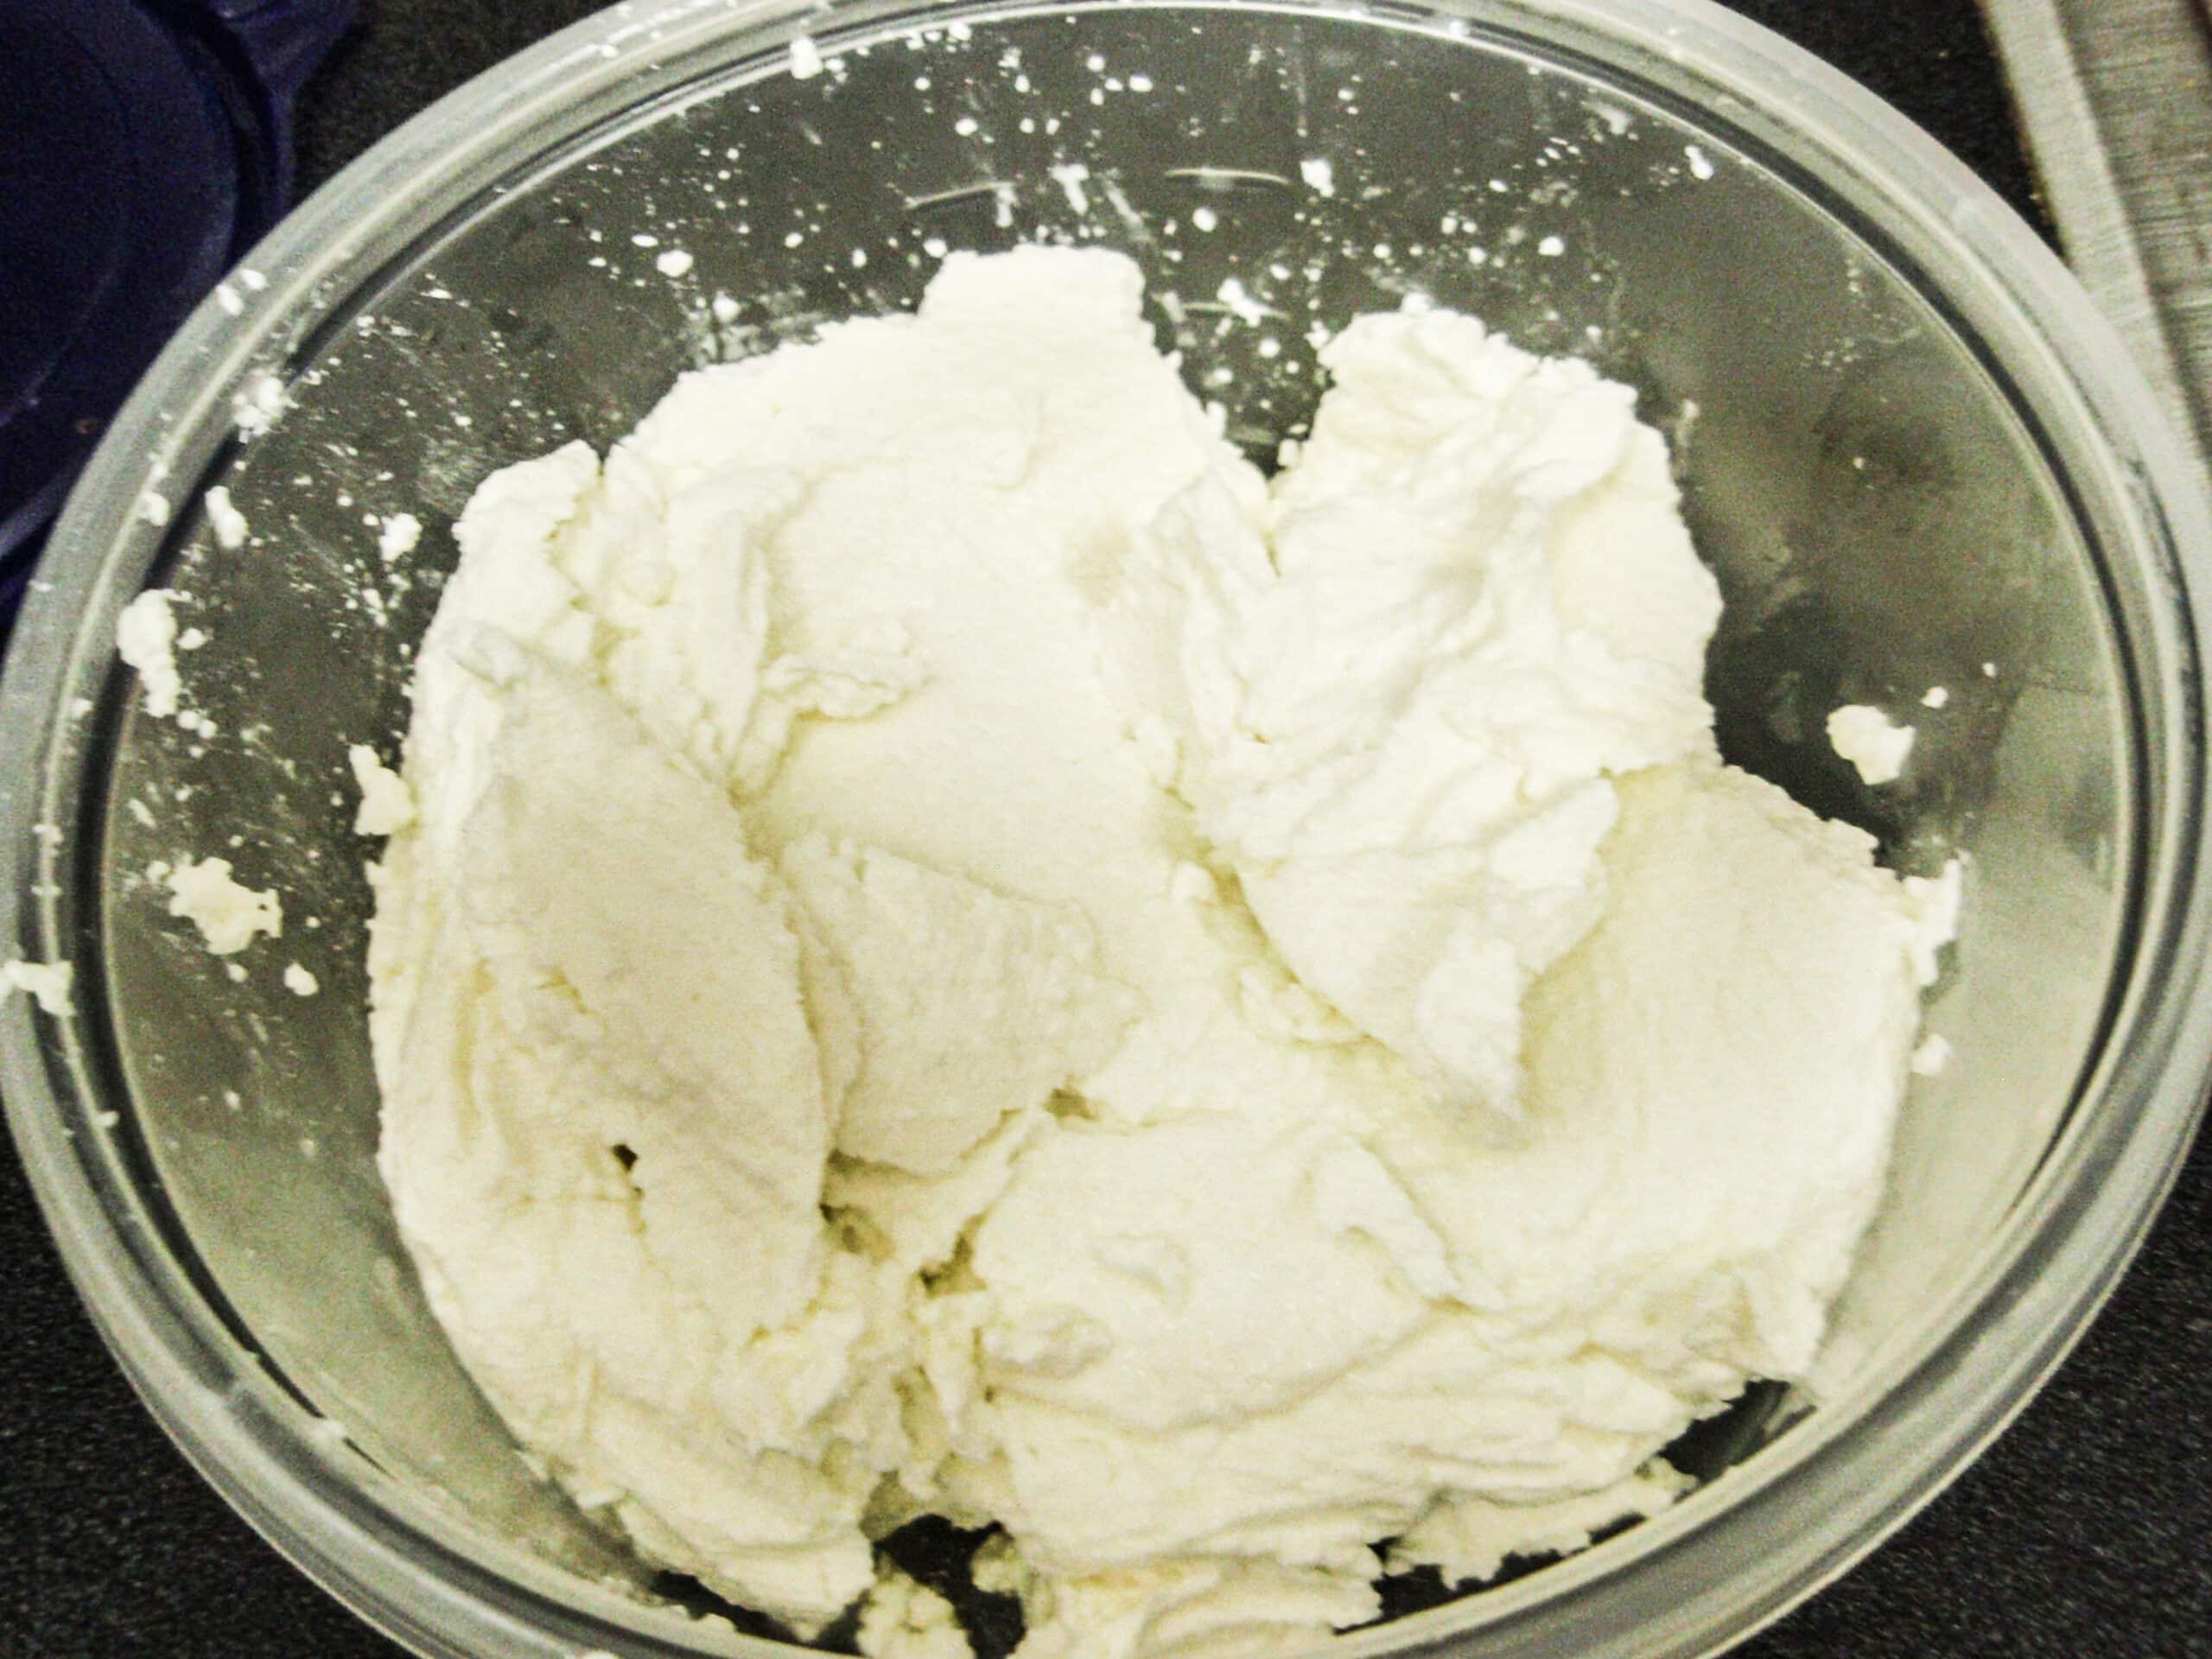 What are the benefits of freezing ricotta cheese?